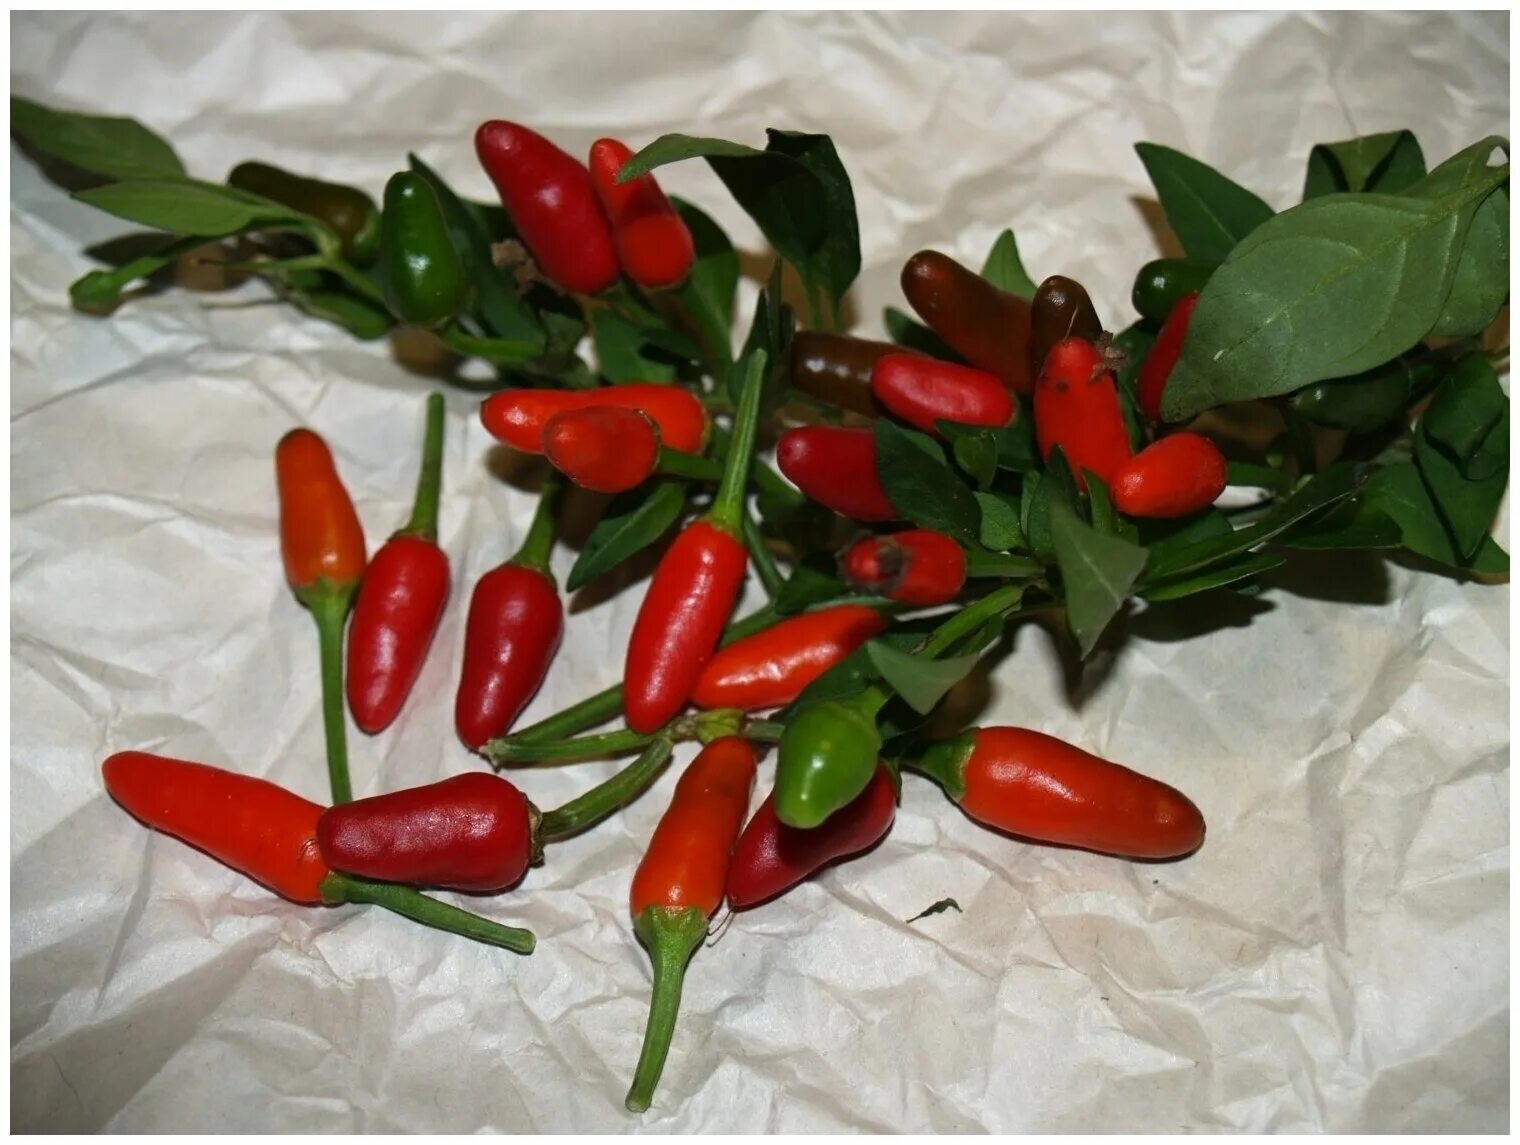 Less peppers